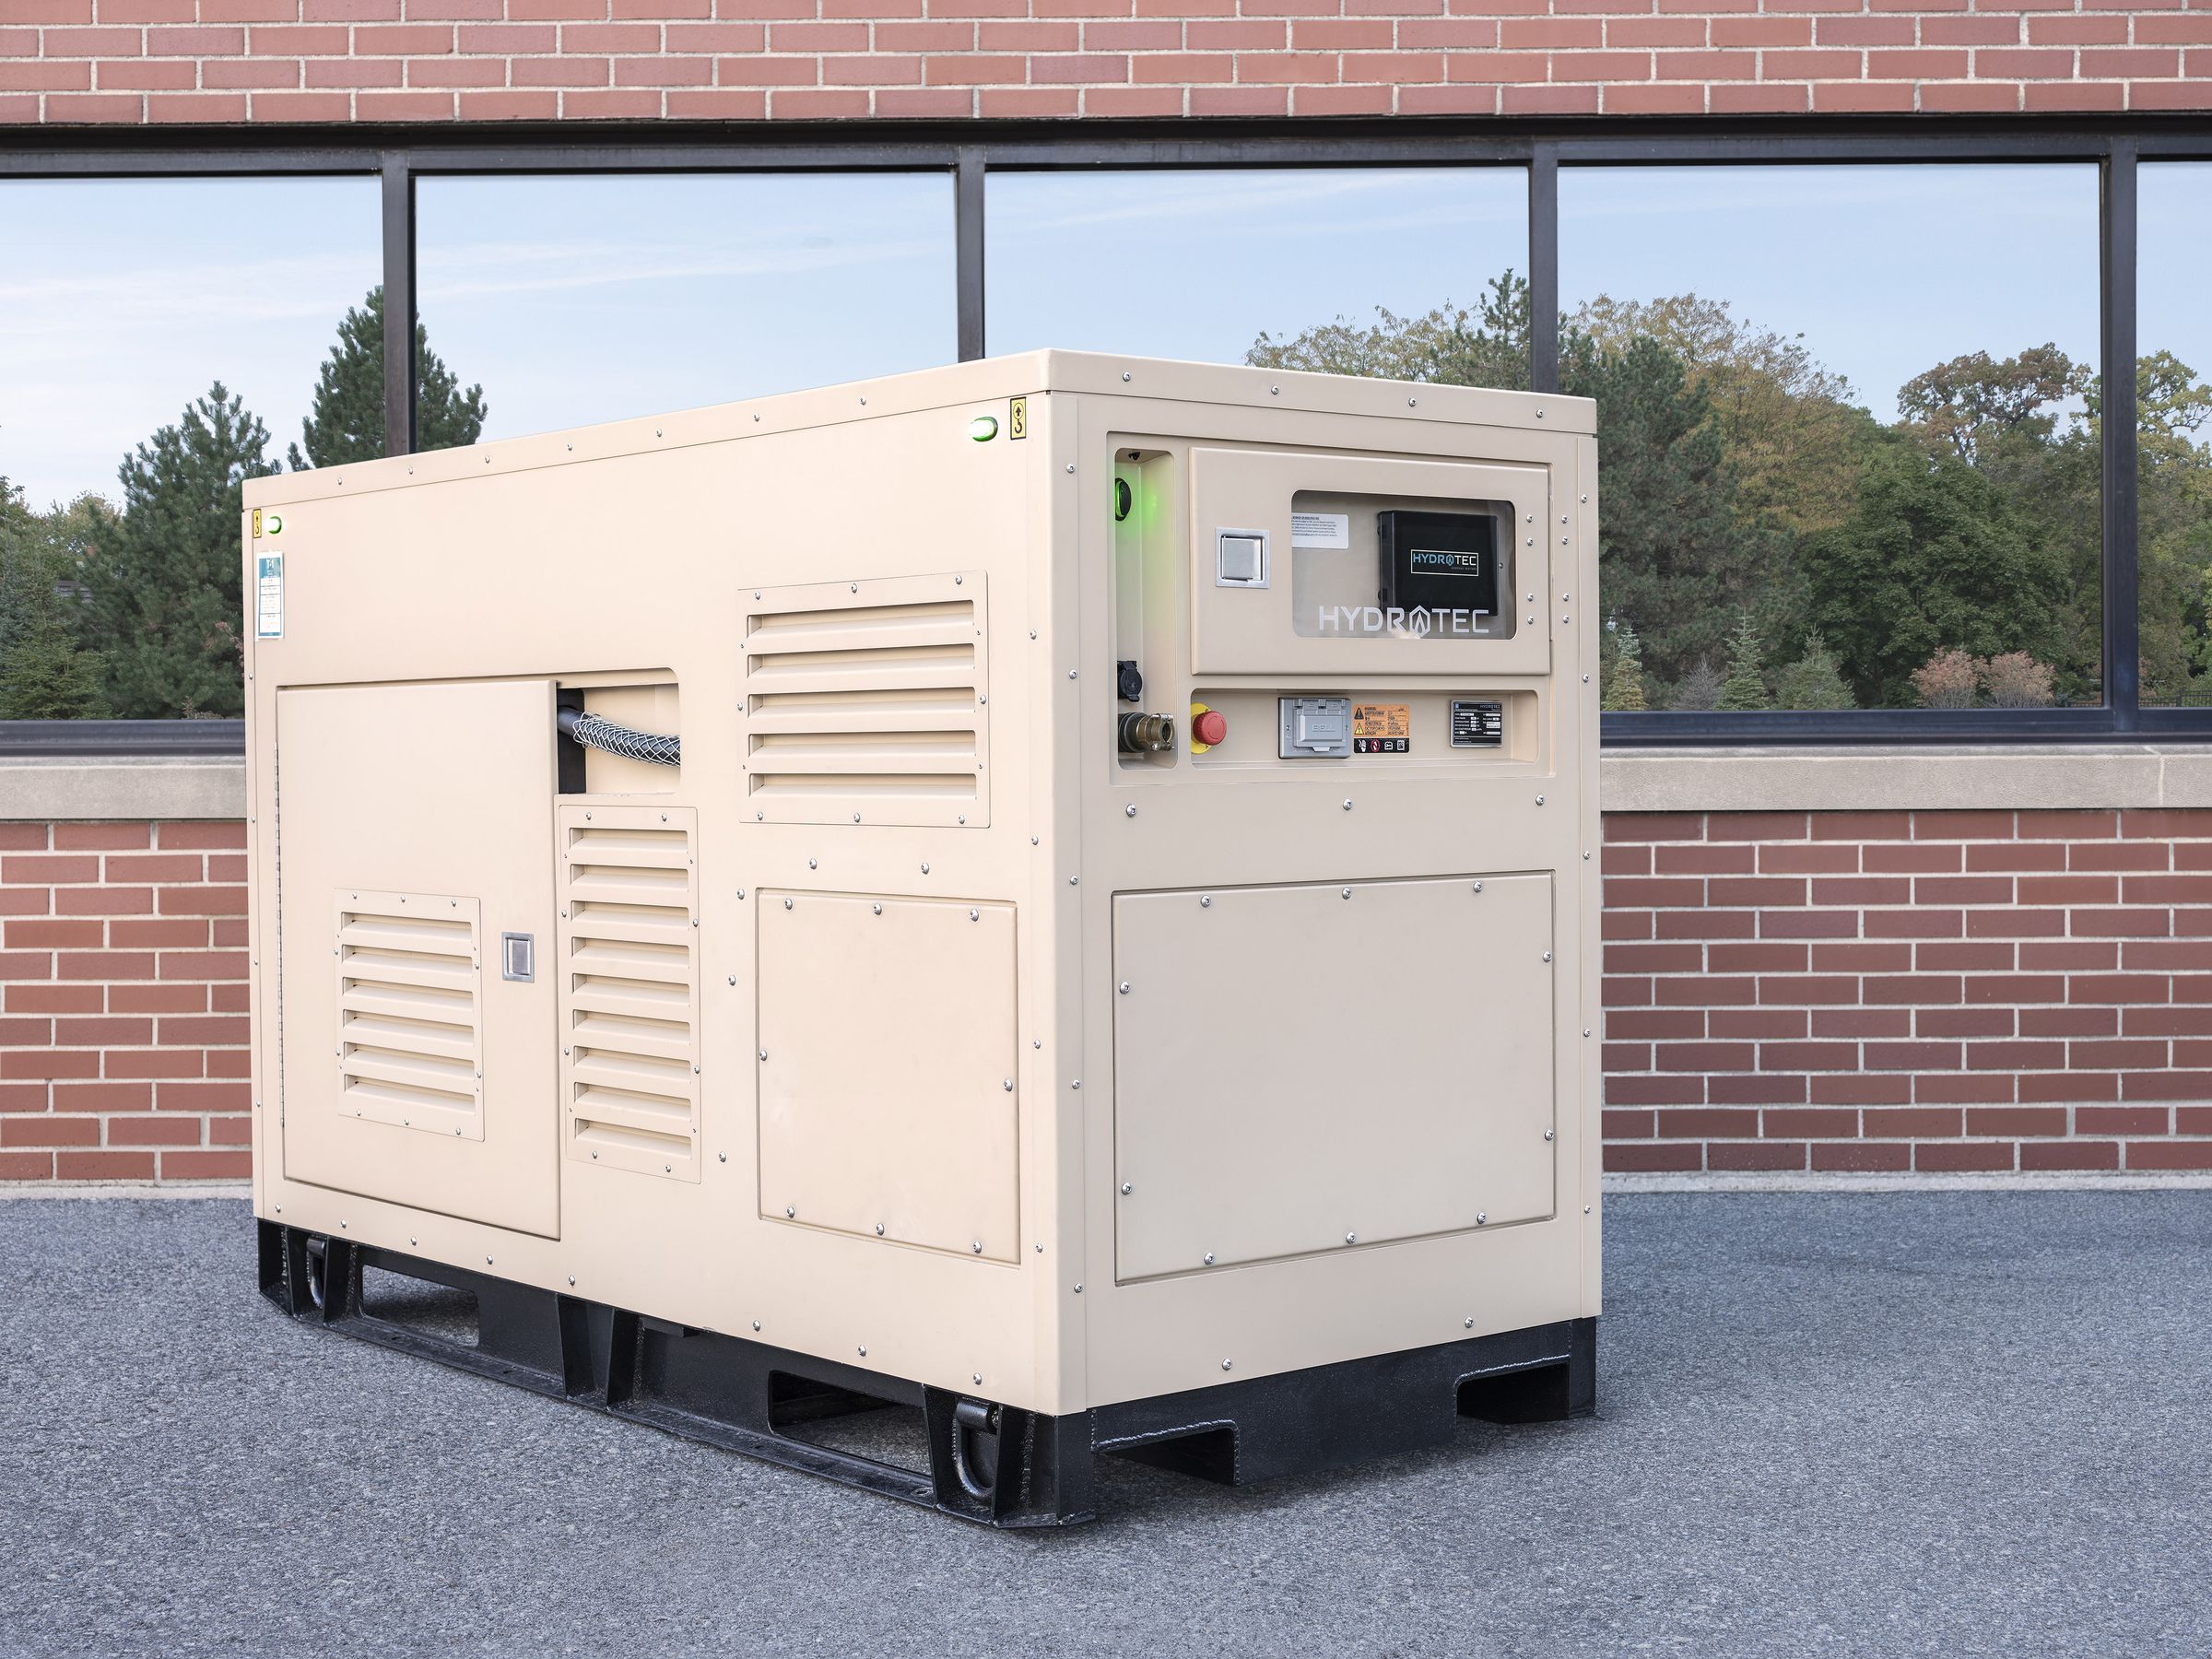 GM’s prototype palletized Mobile Power Generator converts offboard, bulk-stored hydrogen to electricity to quietly and efficiently power military camps and installations with no emissions in operation.